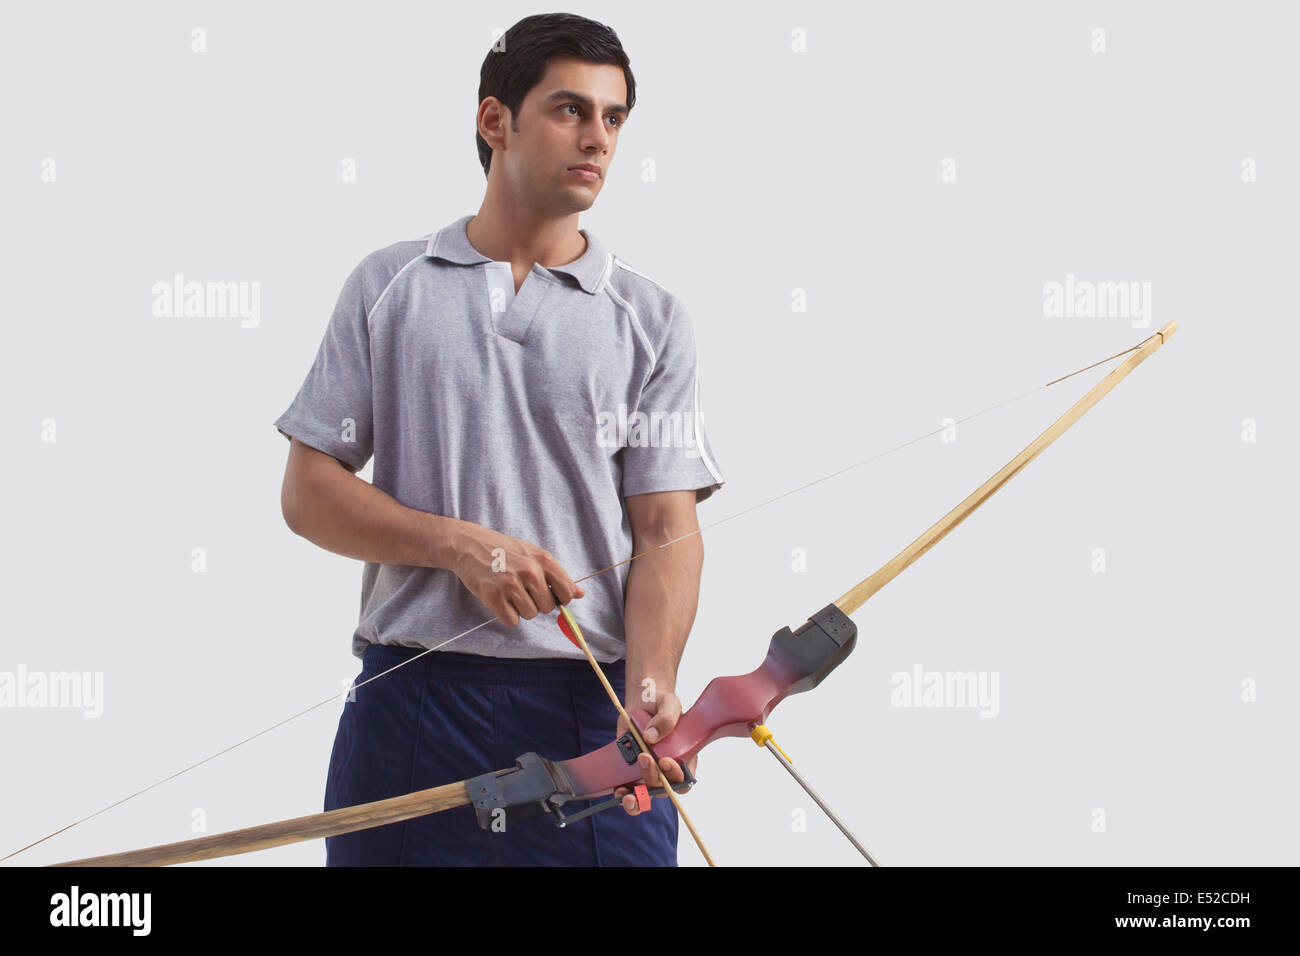 Young male archer with bow and arrow isolated over gray background Stock Photo